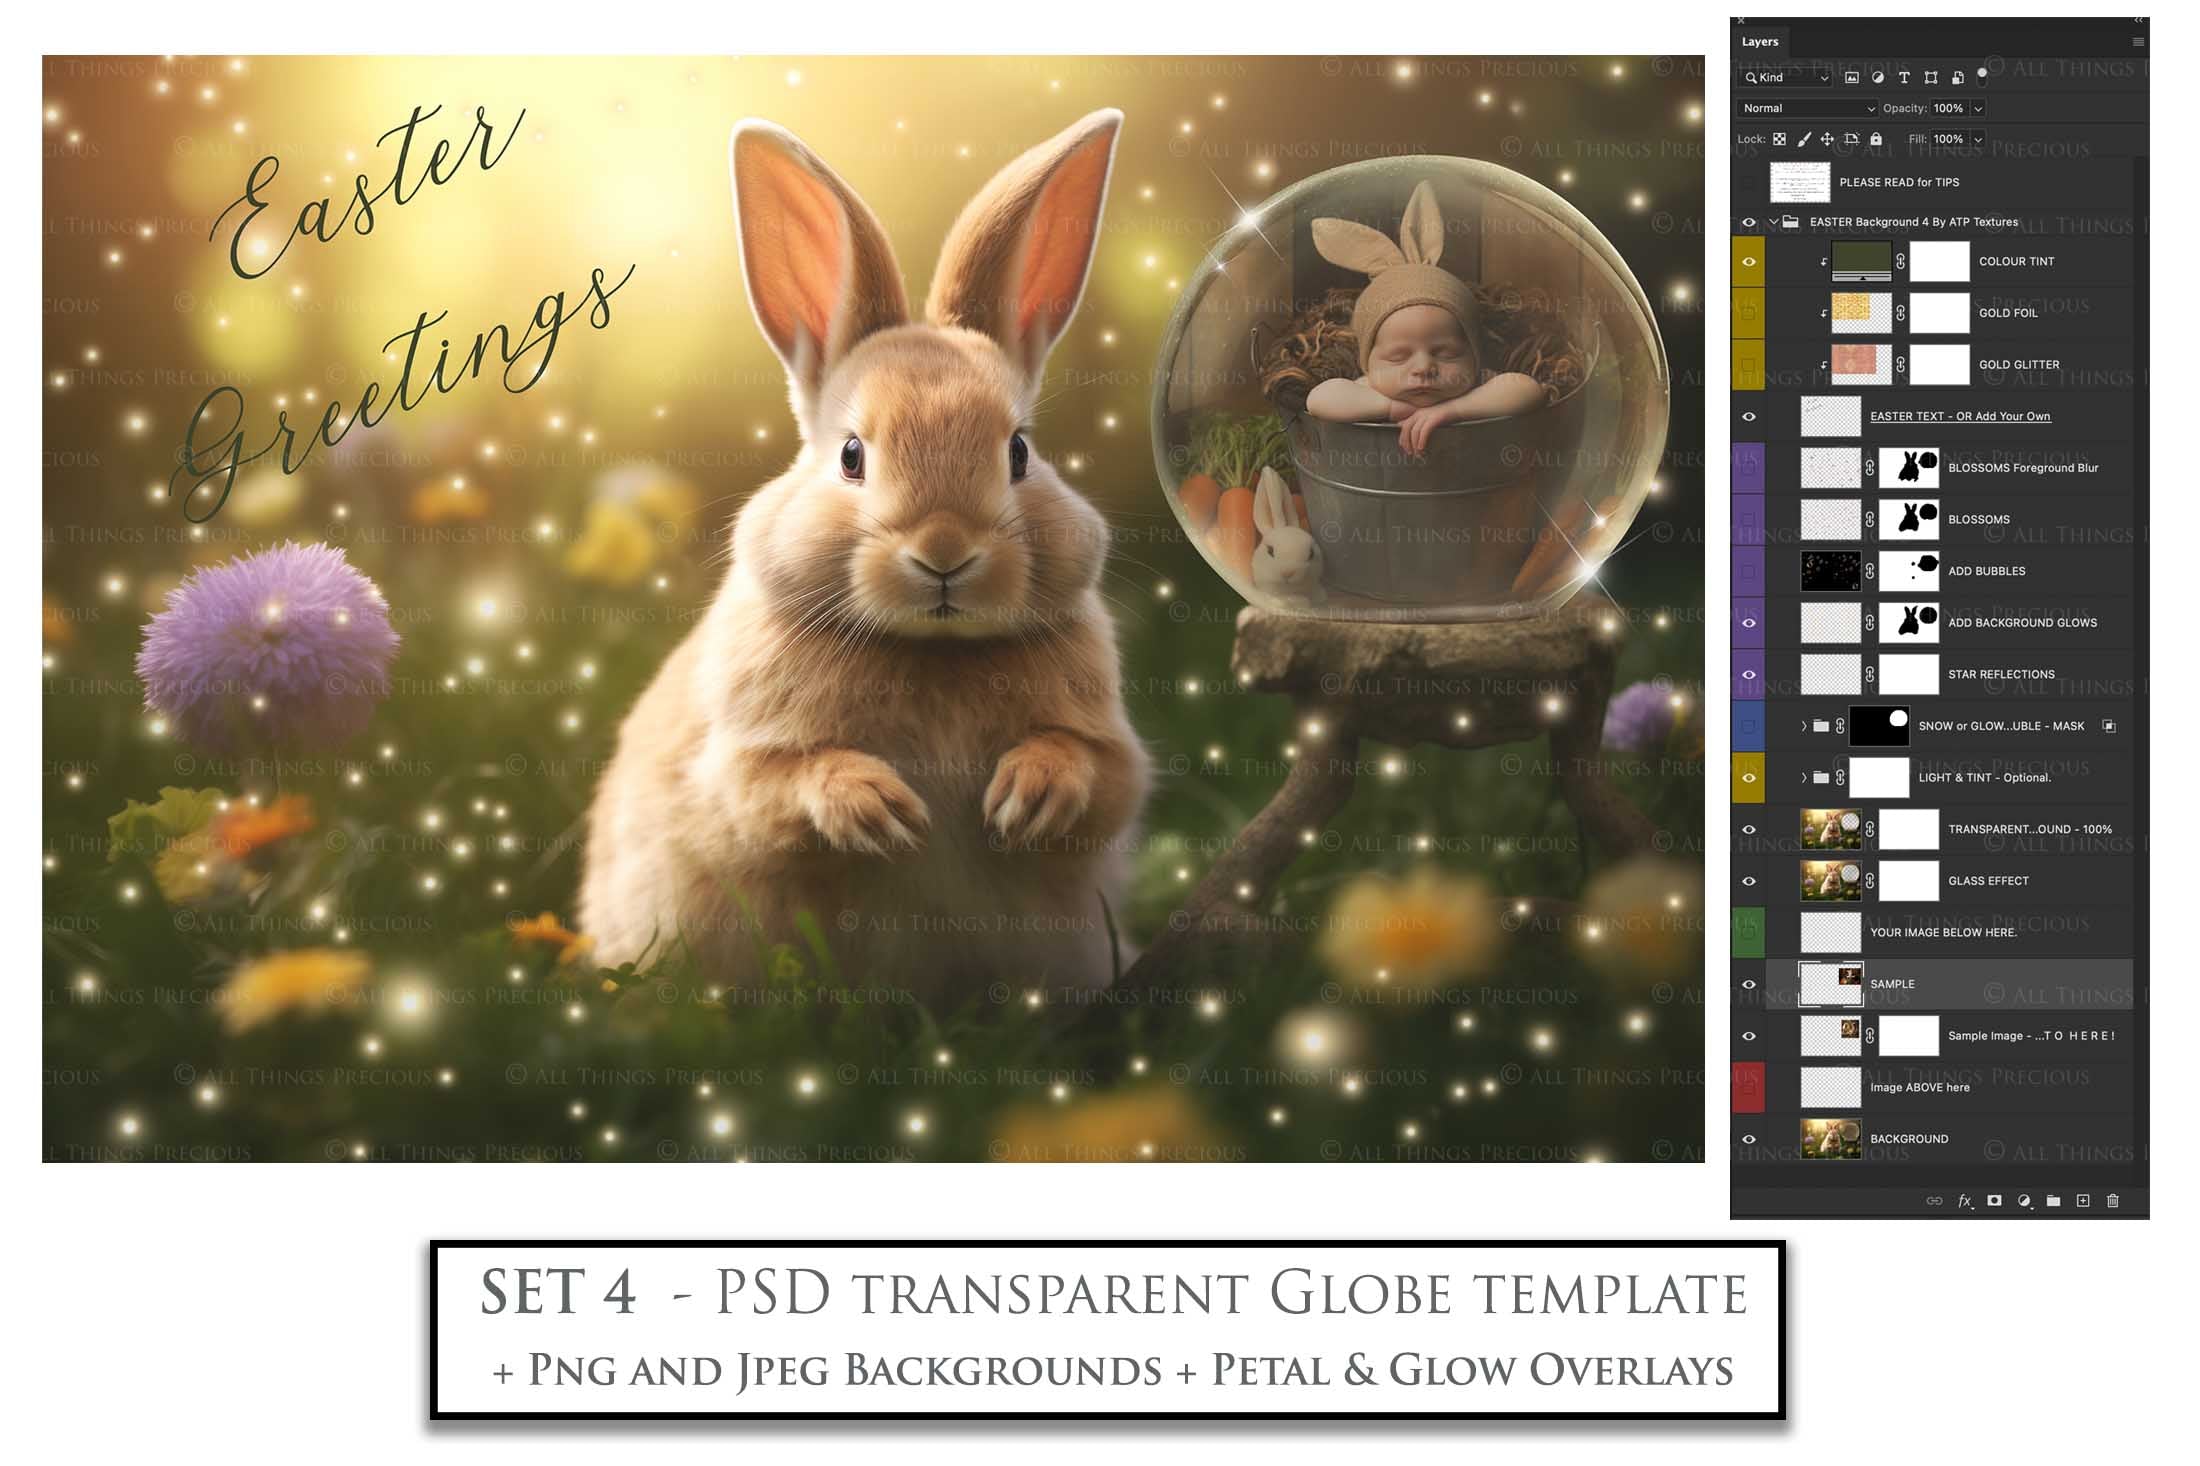 Easter bunny Announcement PSD template and Overlays. Digital Background, with Glows and petals. The globe is transparent, perfect for you to add your own images and retain the glass globe effect.This file is 6000 x 4000, 300dpi. Photography, Scrapbooking, Png, Jpeg, Psd. ATP Textures.